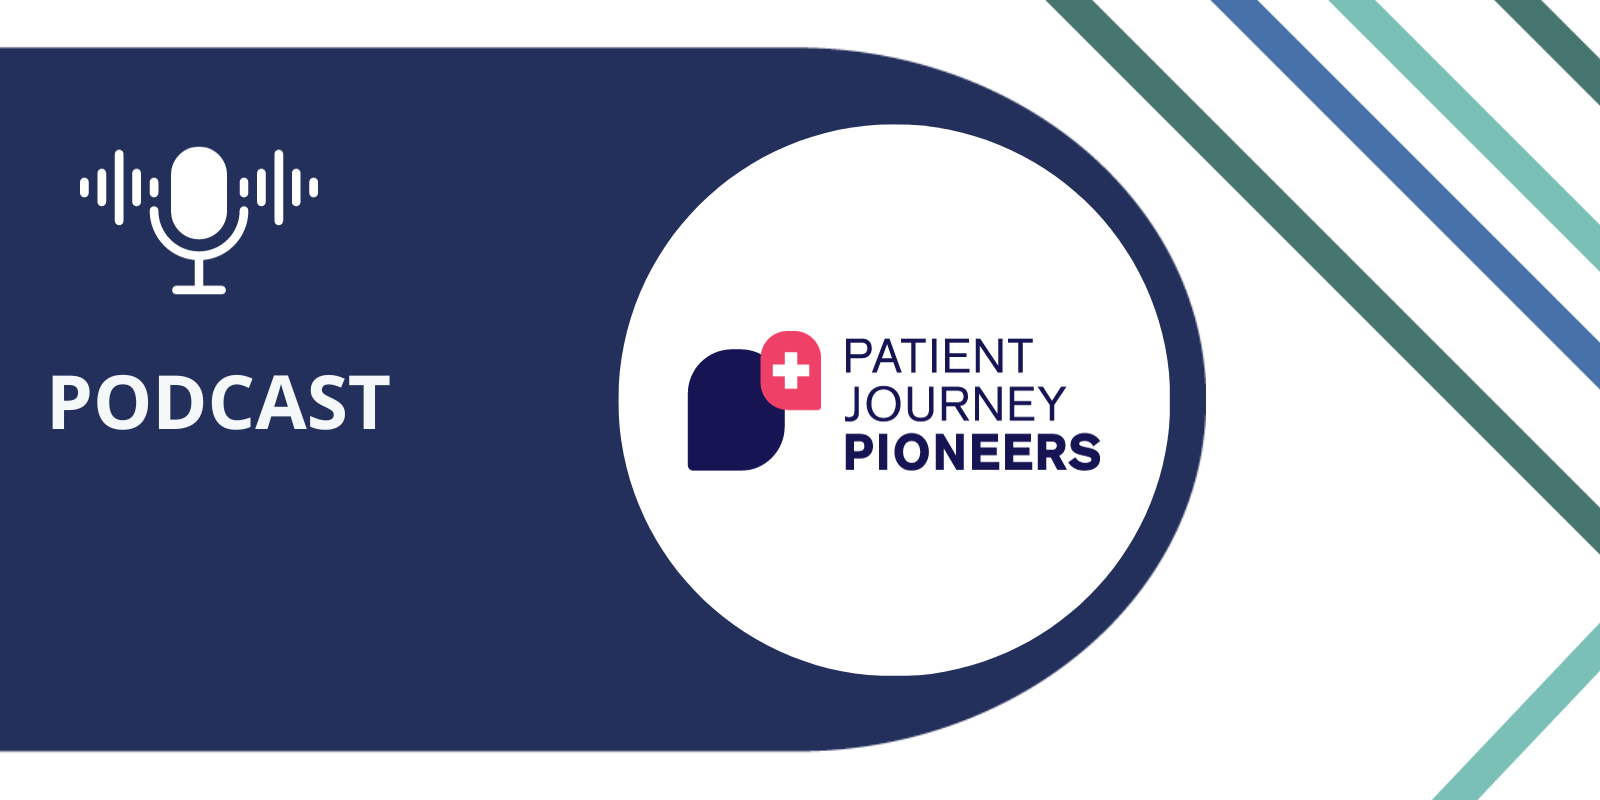 Find a Physician & Beyond: Guiding the Digital Patient Journey